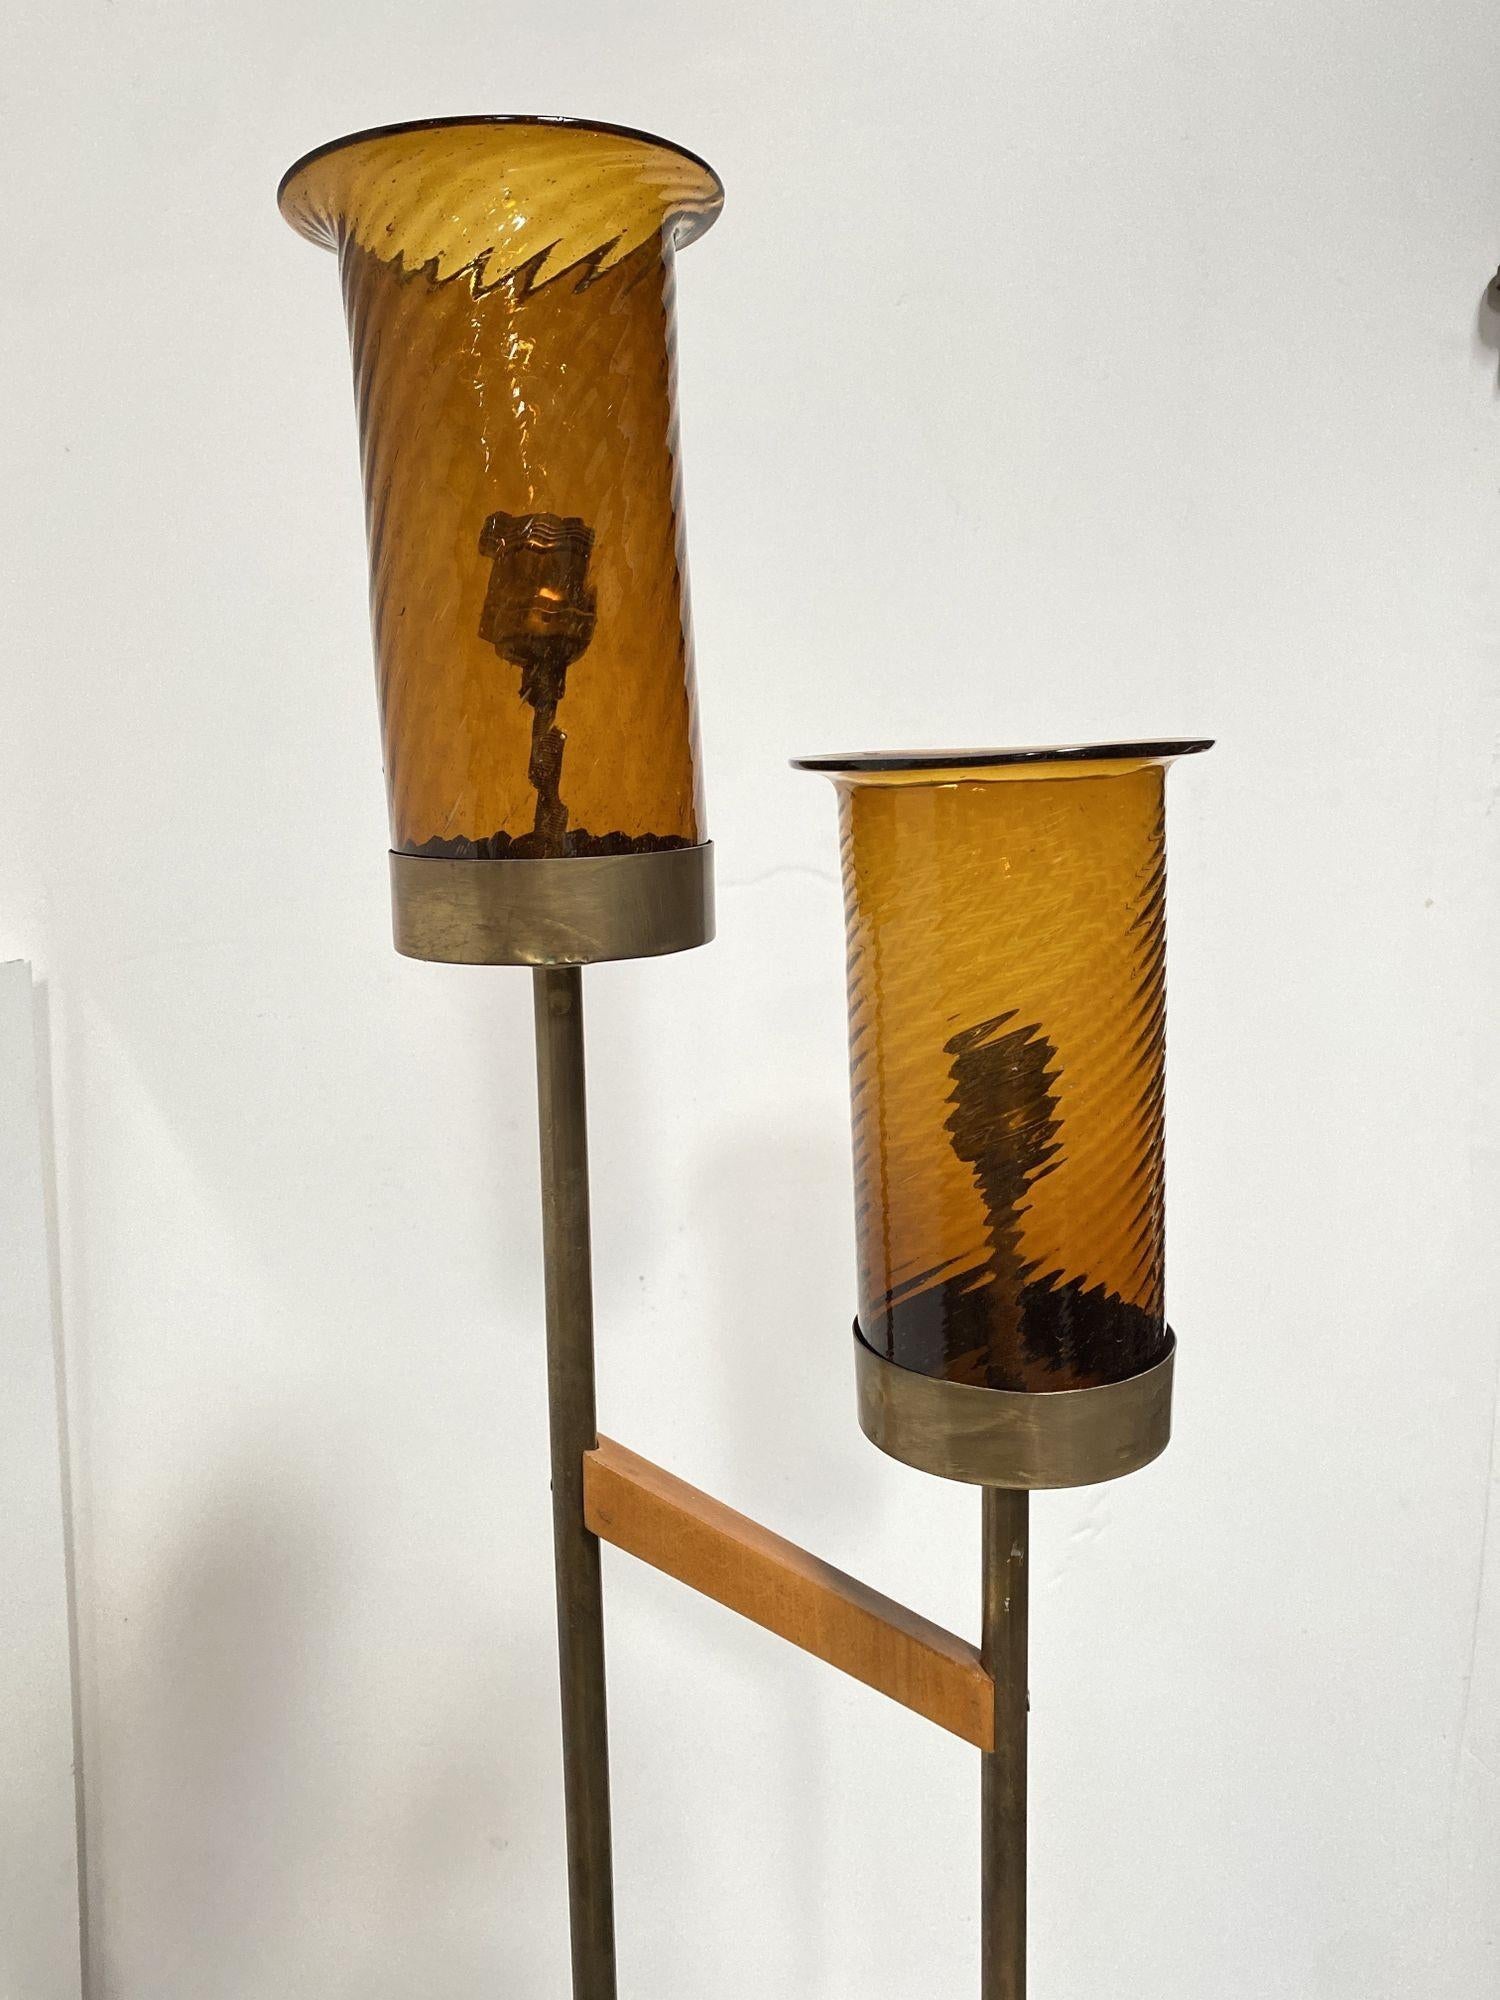 North American Asymmetric Mid-century Brass Torchiere Floor Lamp w/ Wood Base Smoked Swirl Glas For Sale